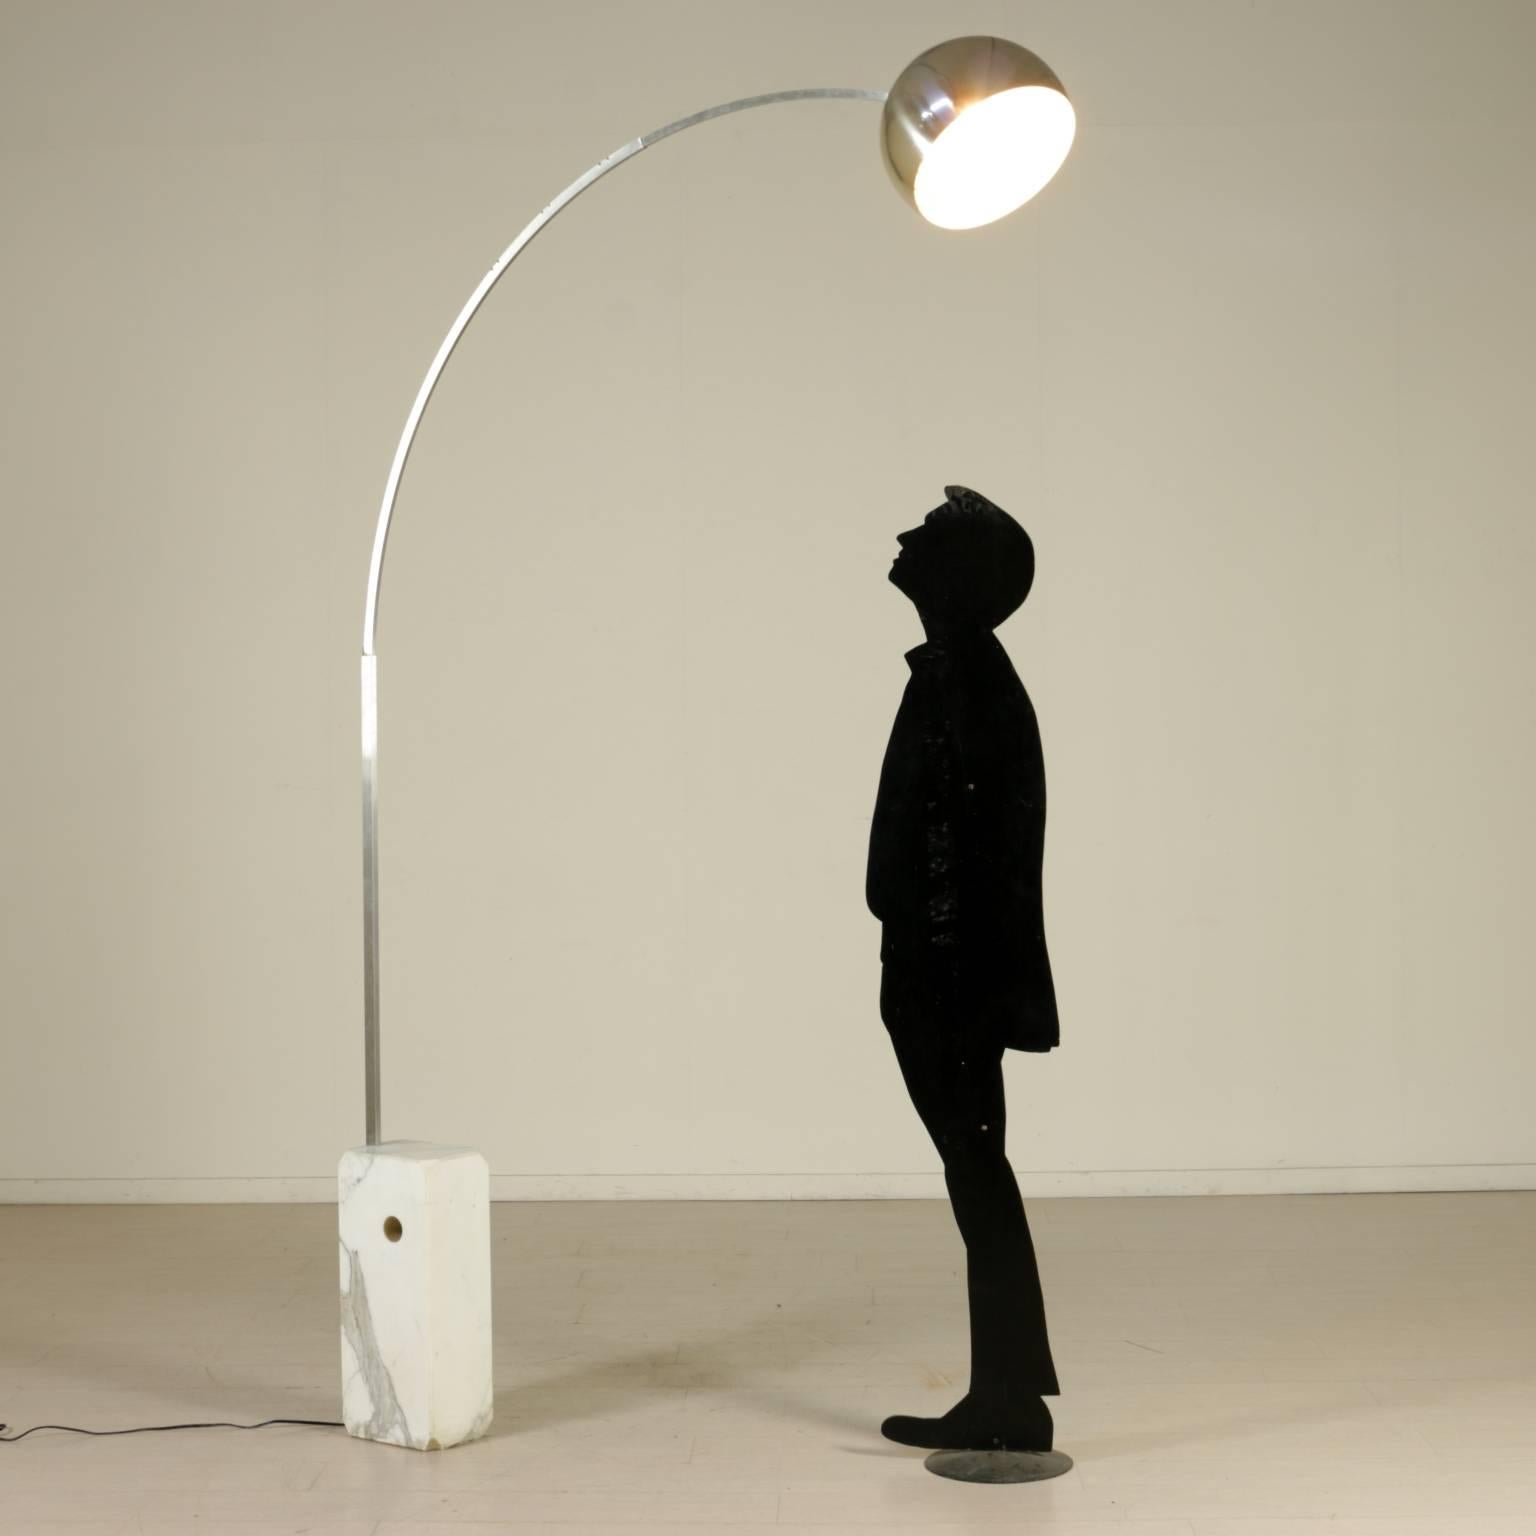 'Arco' floor lamp, original model designed by Castiglioni brothers for Flos, marble basement, steel. Manufactured in Italy, 1970s. Basement measurements: 24 cm x 18 cm.